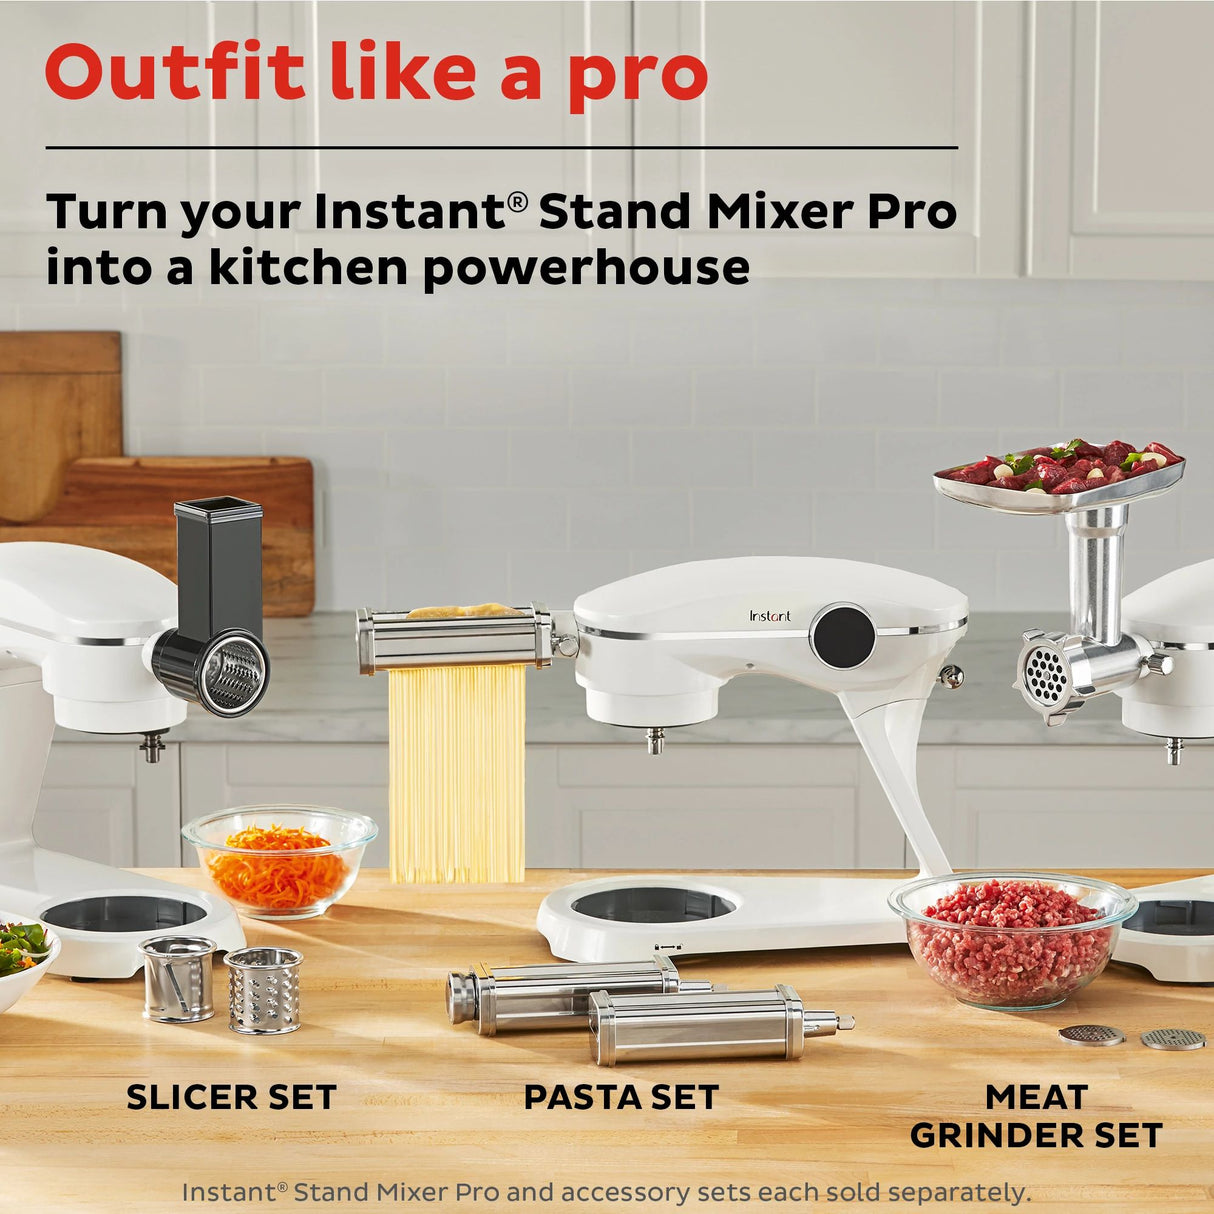  Instant® Slicer/Shredder Accessory Set for Stand Mixer Pro with text outfit like a pro